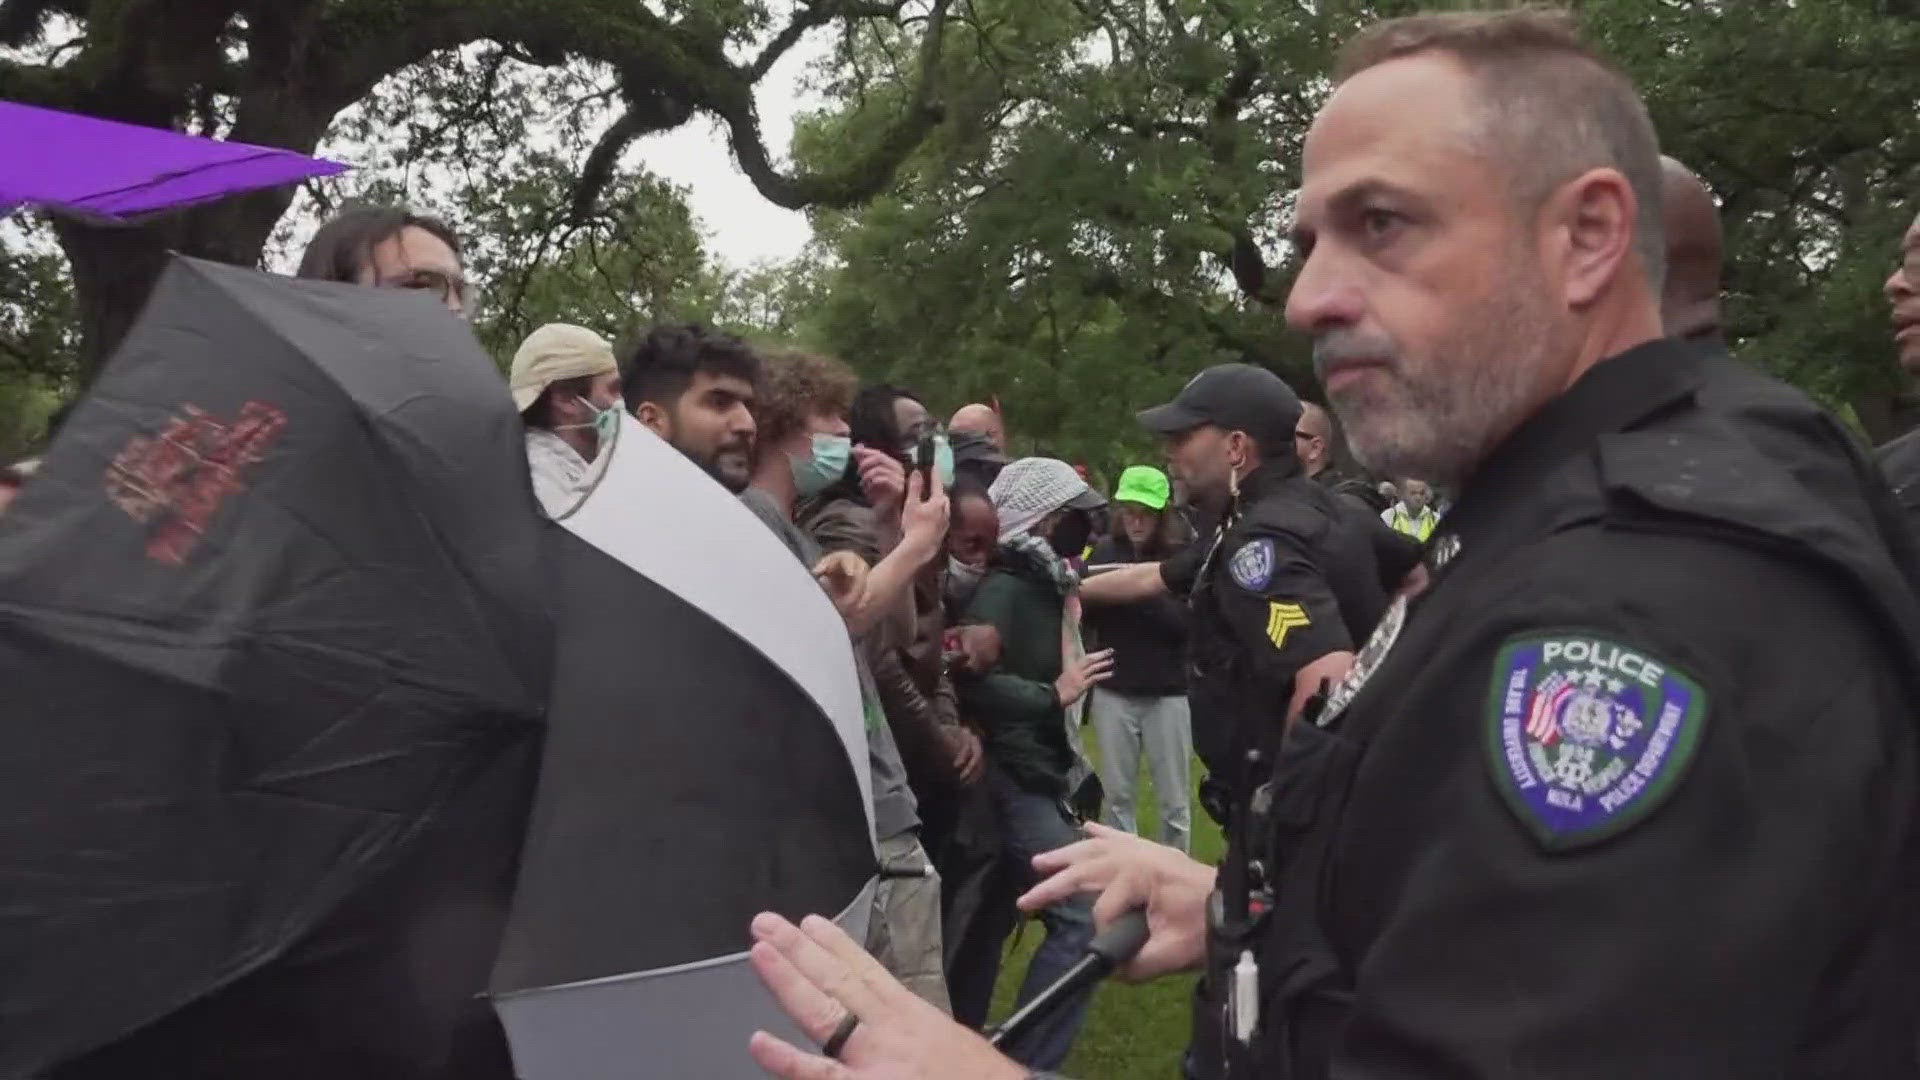 Pro-Palestine protests continue on Tulane campus as they clash with police on Wednesday.